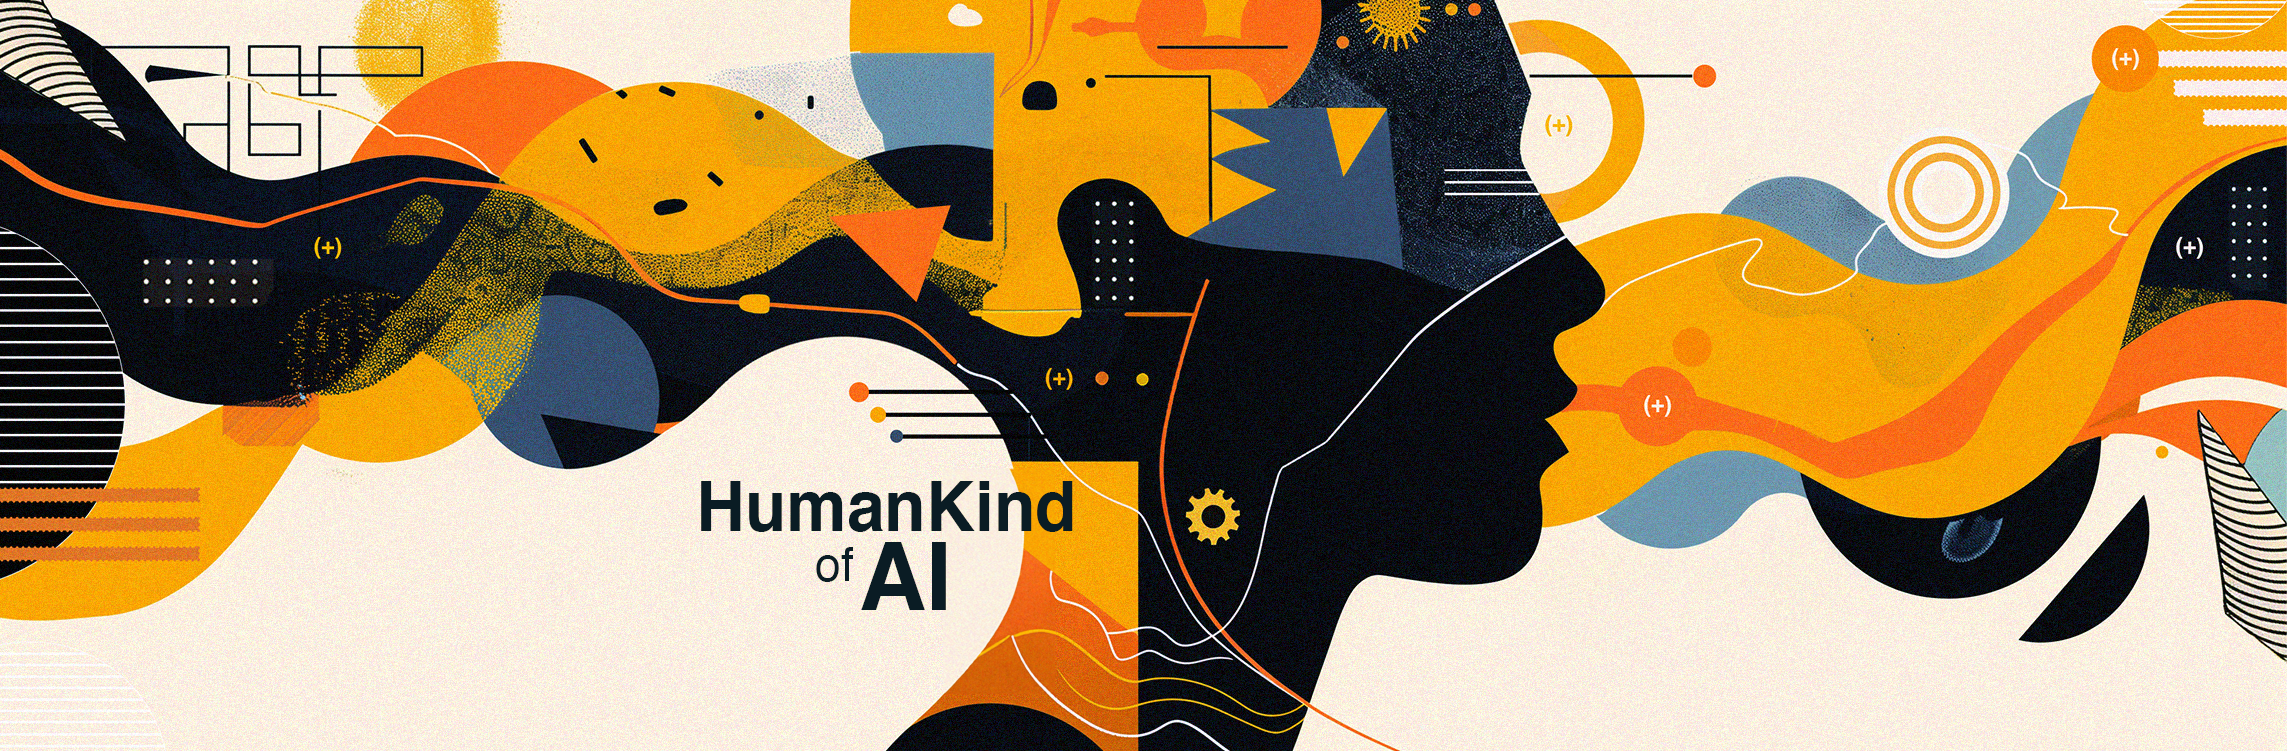 The words "HumanKind of AI" combined with geometric and organic shapes in vivid colors, centering on a human silhouette against a dynamic background.